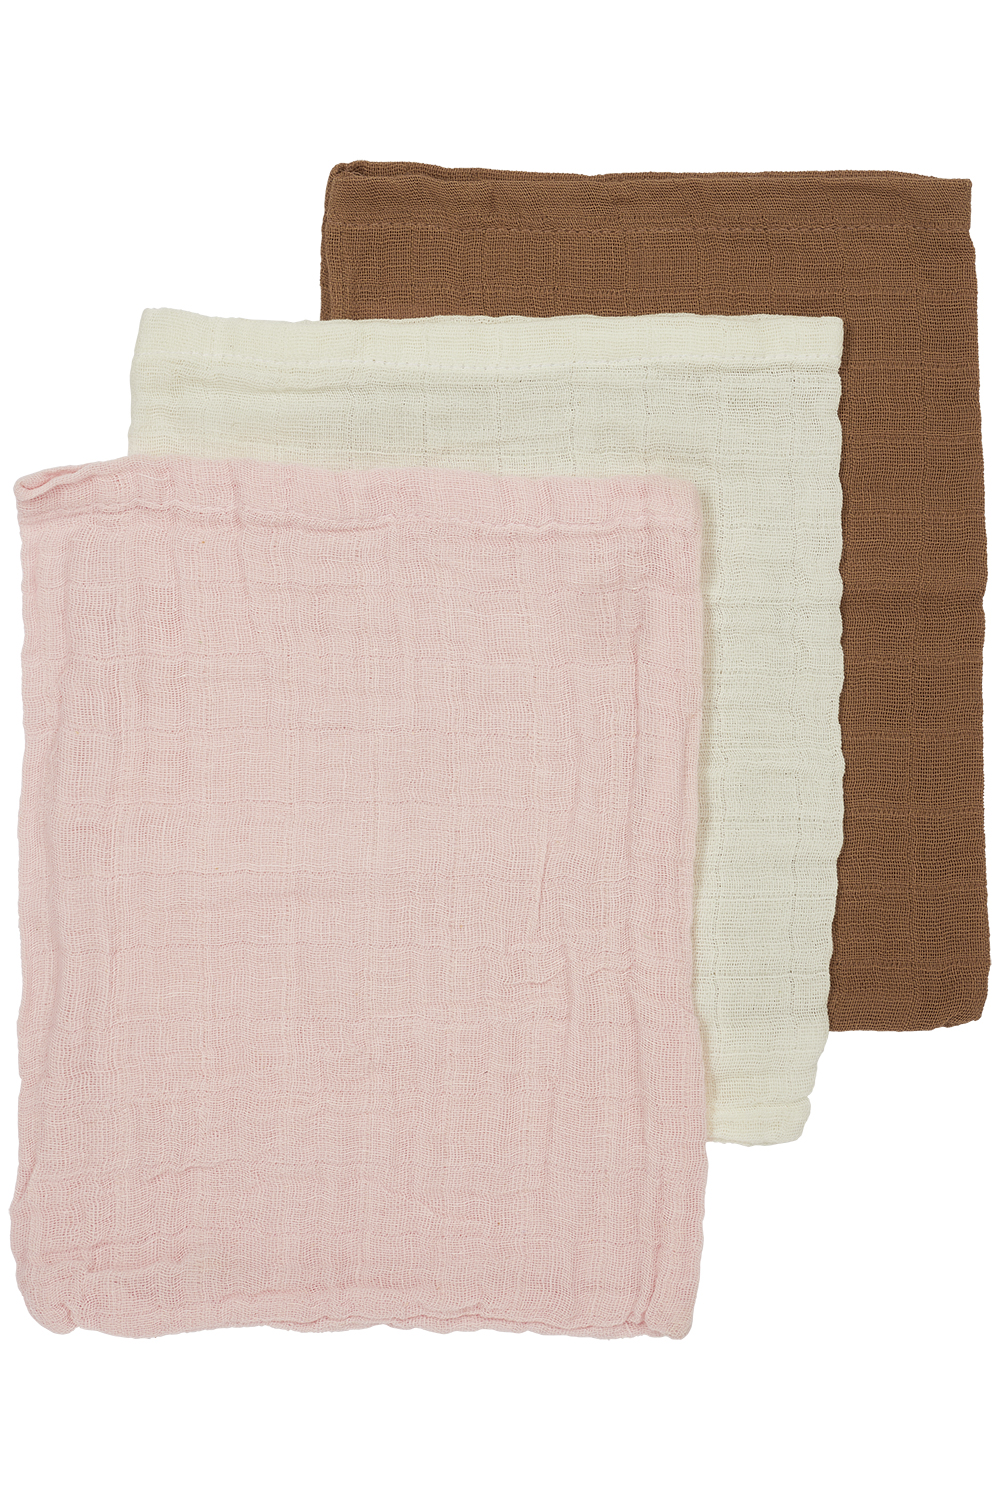 Waschhandschuhe 3er pack pre-washed musselin Uni - offwhite/soft pink/toffee - 20x17cm